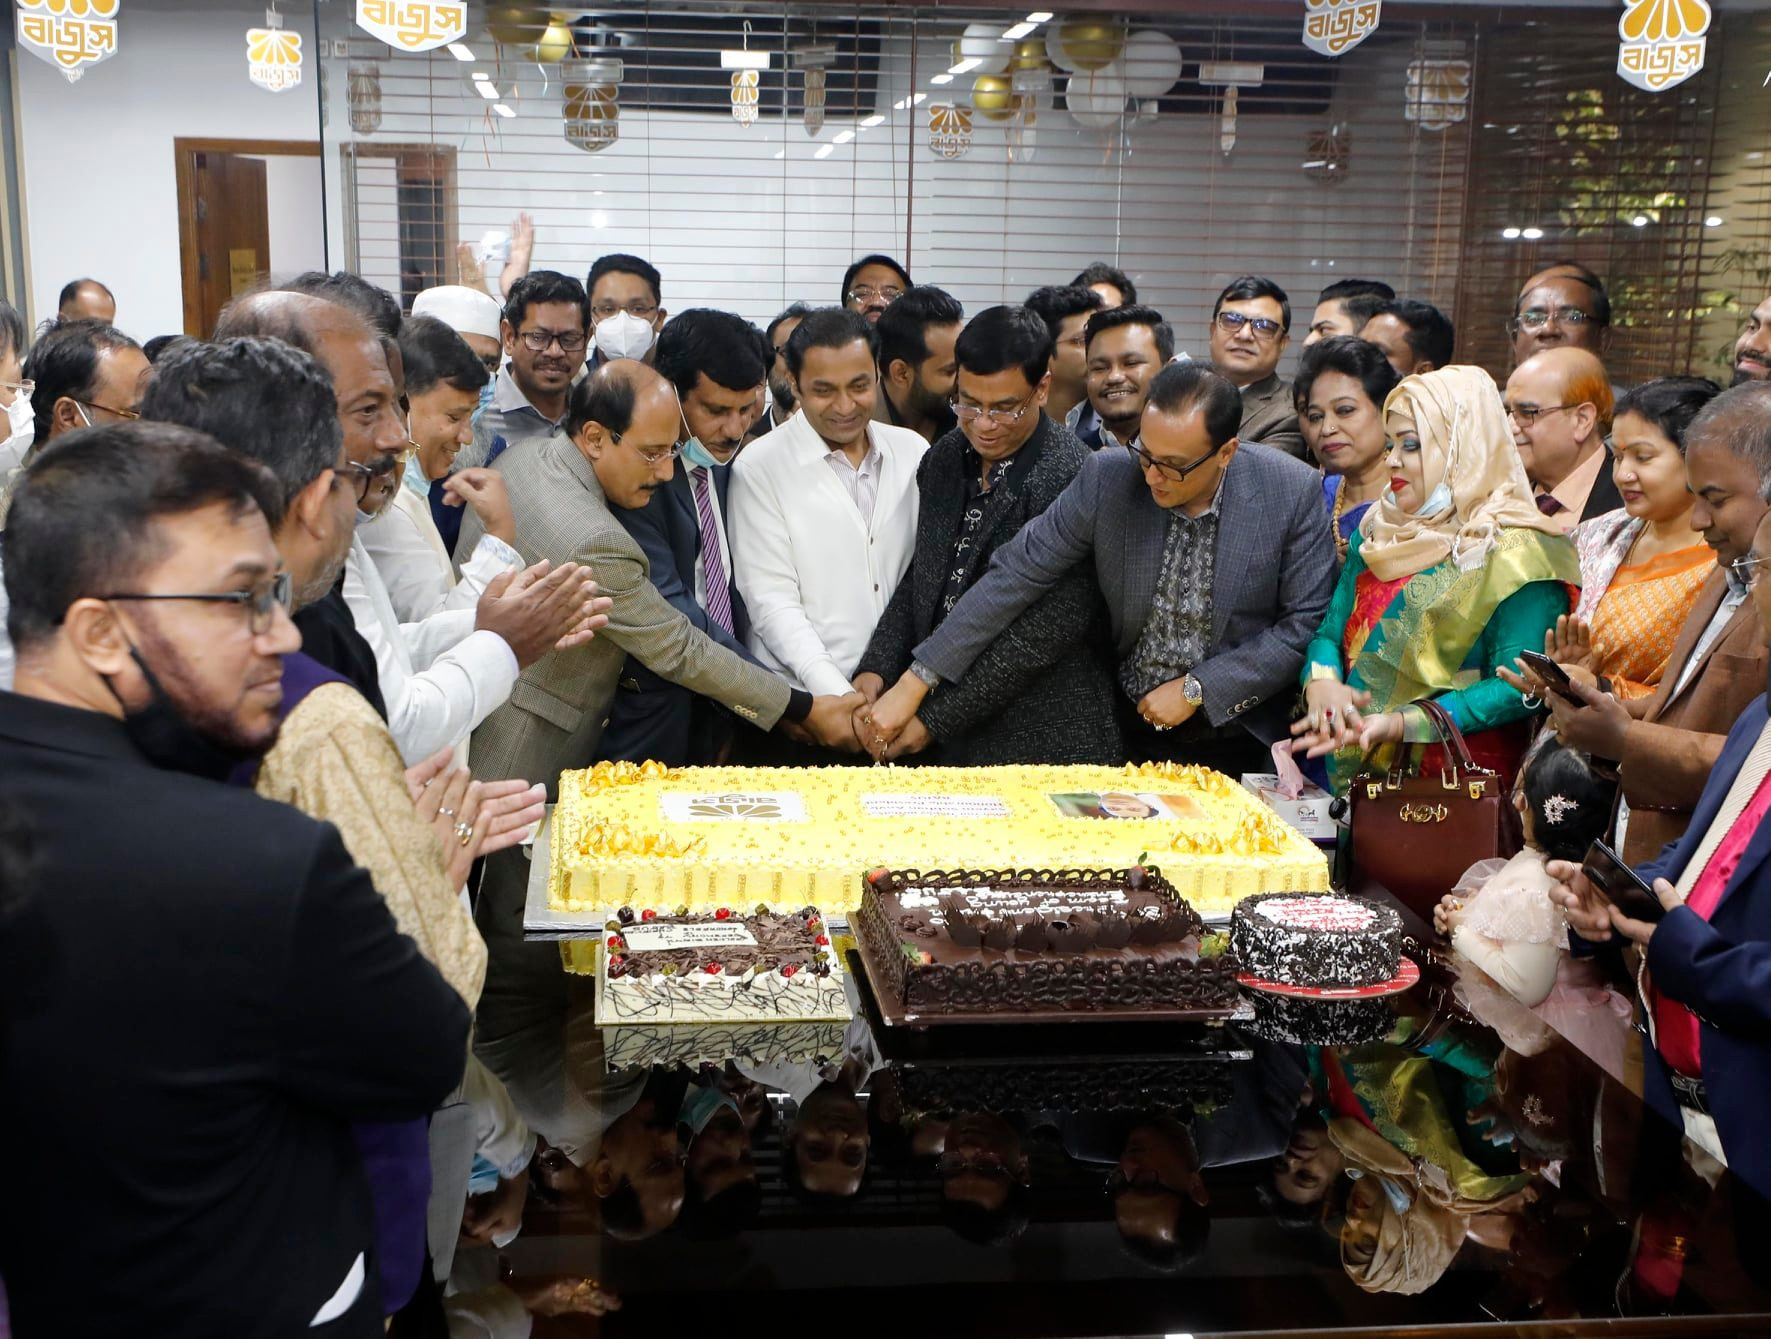 Bangladesh Jeweller's Association (BAJUS) celebrates its President Sayem Sobhan Anvir's birthday by cutting cakes on Tuesday at its new office in Bashundhara Shopping Complex.